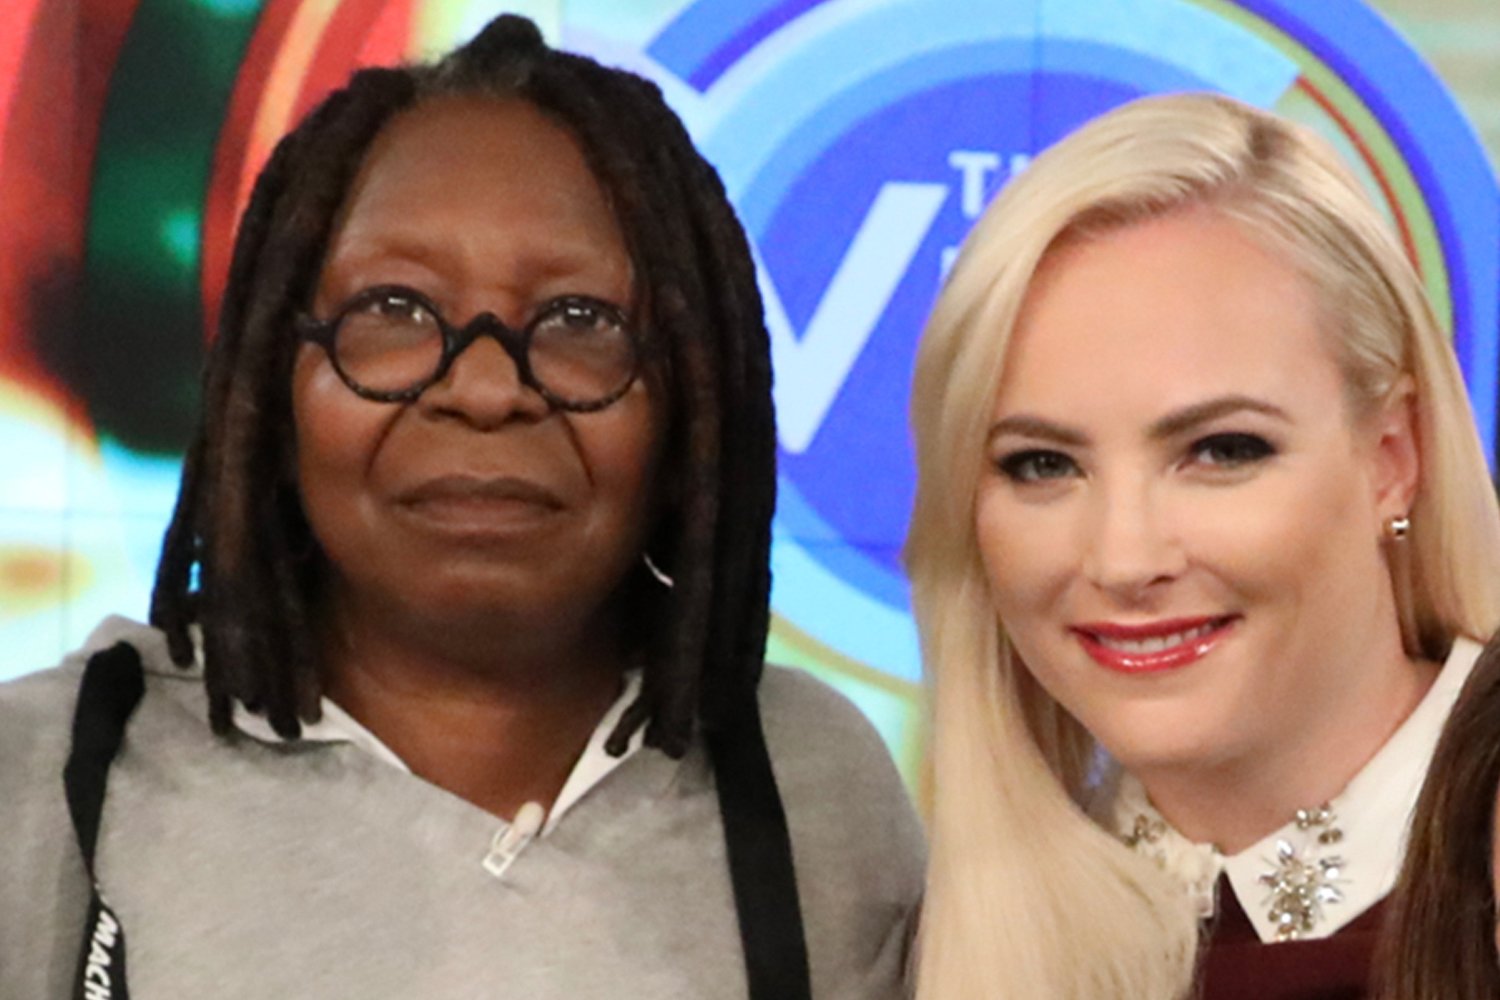 Whoopi Goldberg and Meghan McCain posing together on the set of 'The View'